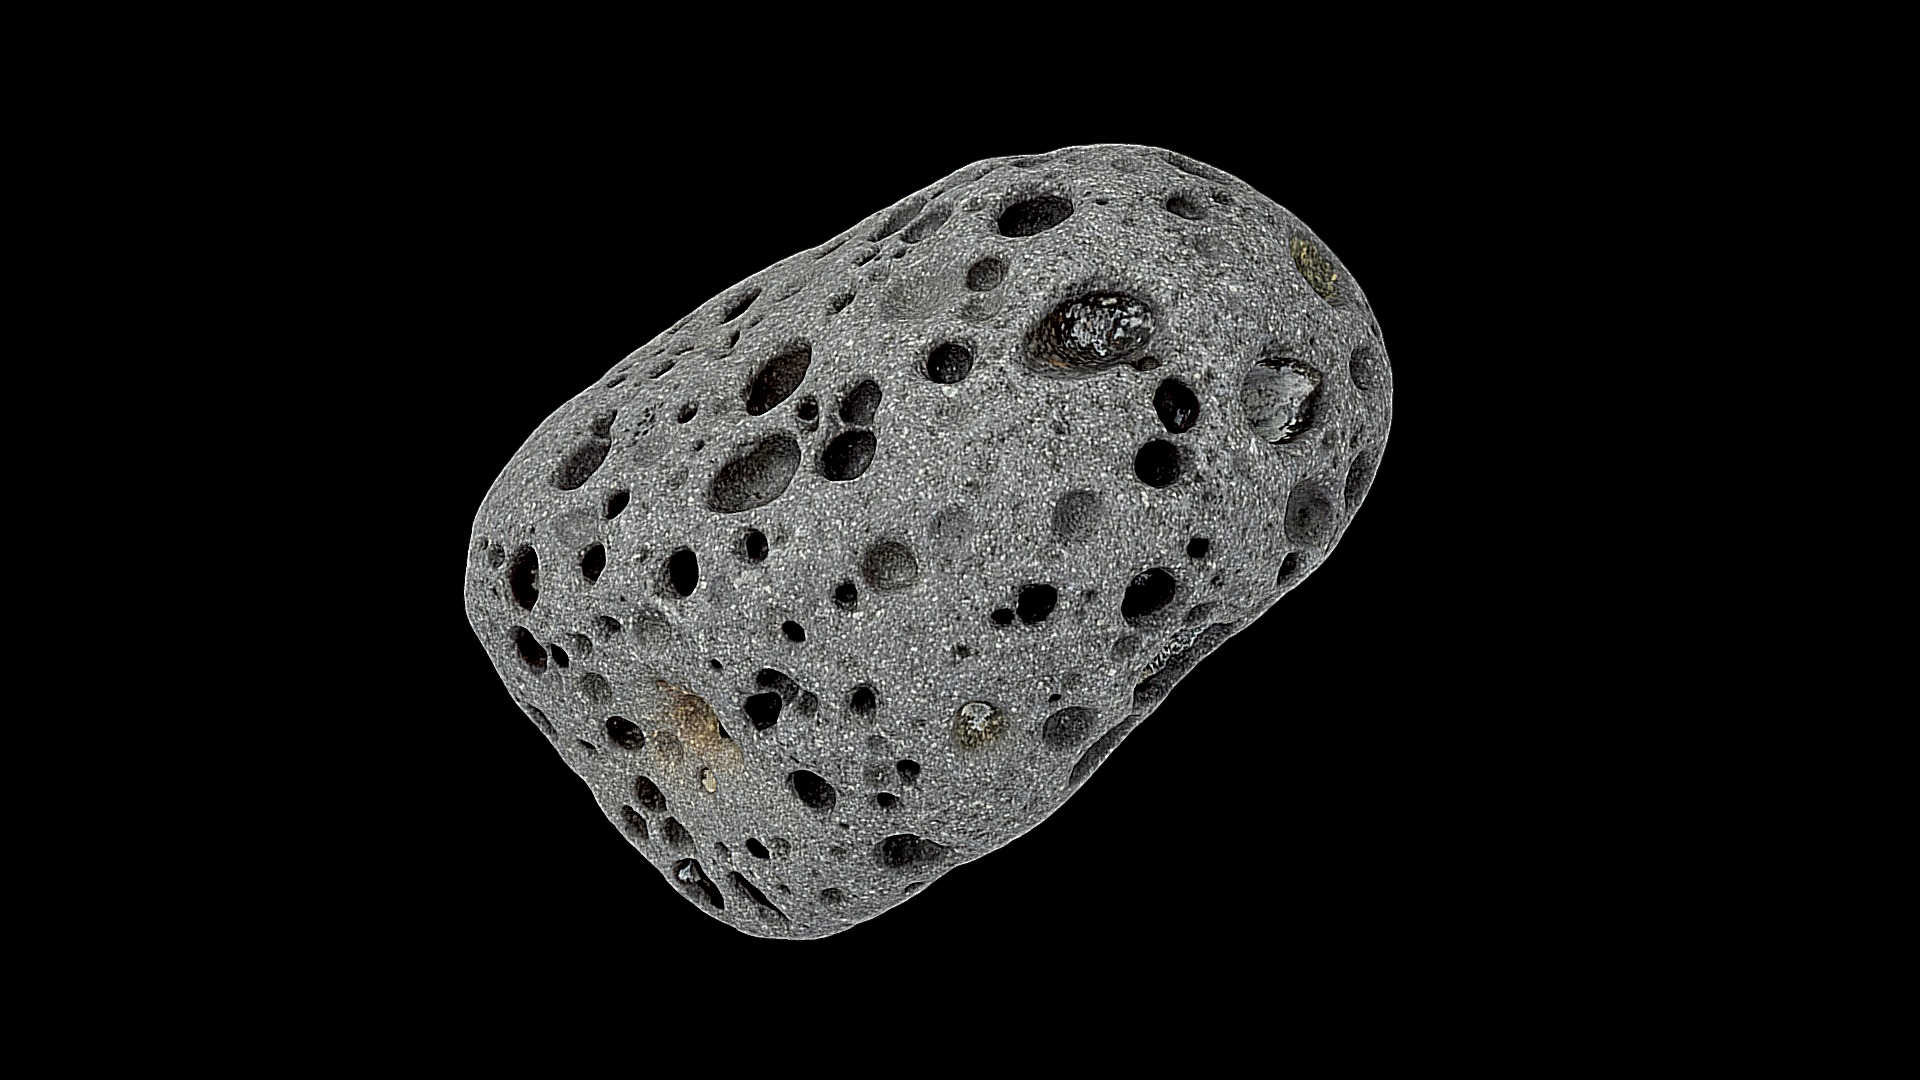 3D model Grey volcanic pebble - This is a 3D model of the Grey volcanic pebble. The 3D model is about a black and white image of a planet.